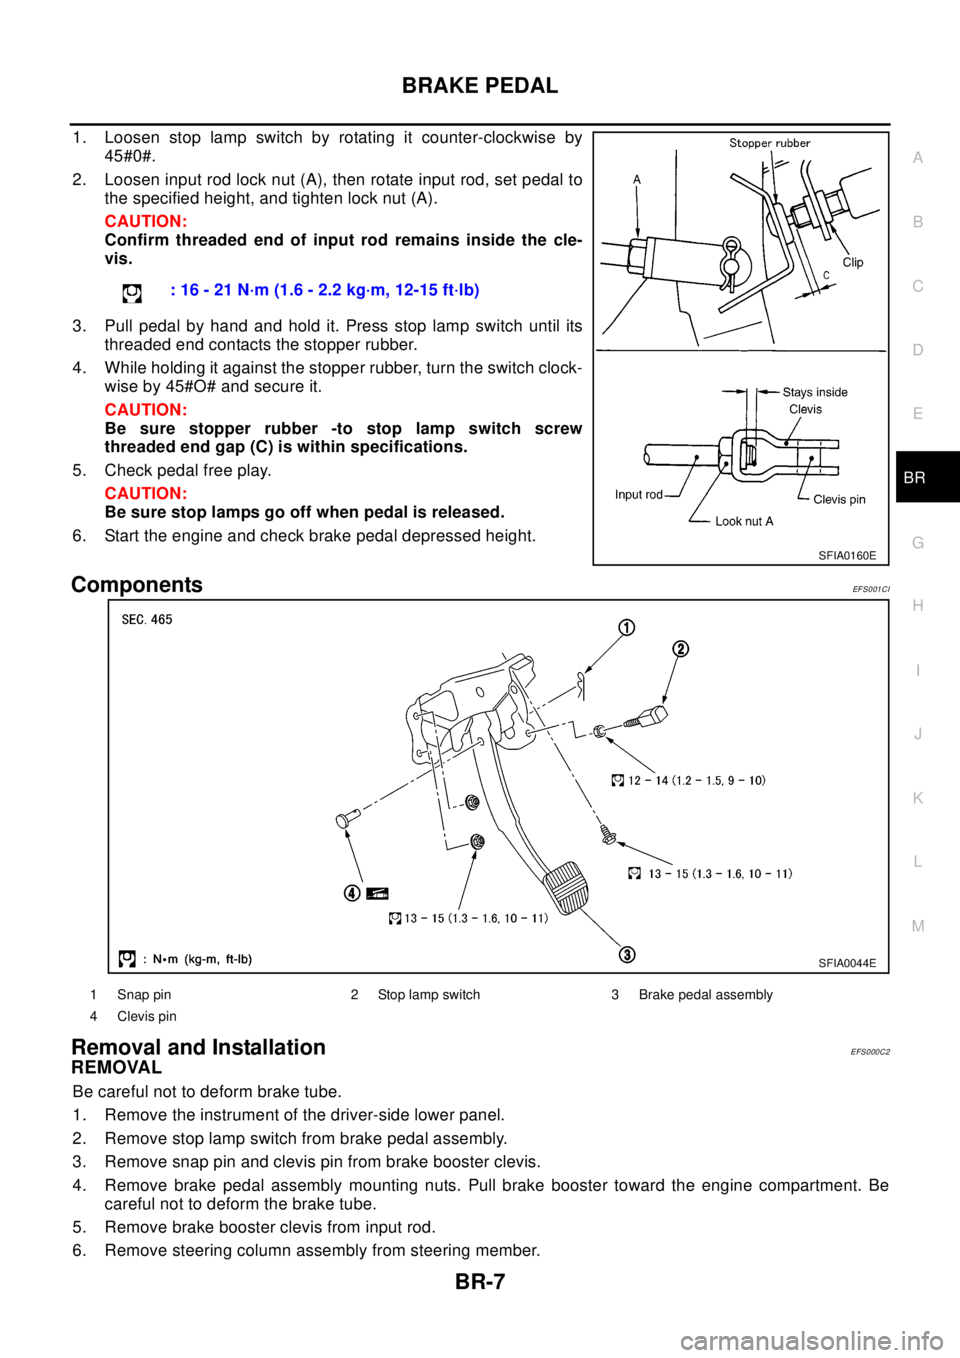 NISSAN X-TRAIL 2003  Electronic Repair Manual BRAKE PEDAL
BR-7
C
D
E
G
H
I
J
K
L
MA
B
BR
1. Loosen stop lamp switch by rotating it counter-clockwise by
45#0#.
2. Loosen input rod lock nut (A), then rotate input rod, set pedal to
the specified hei